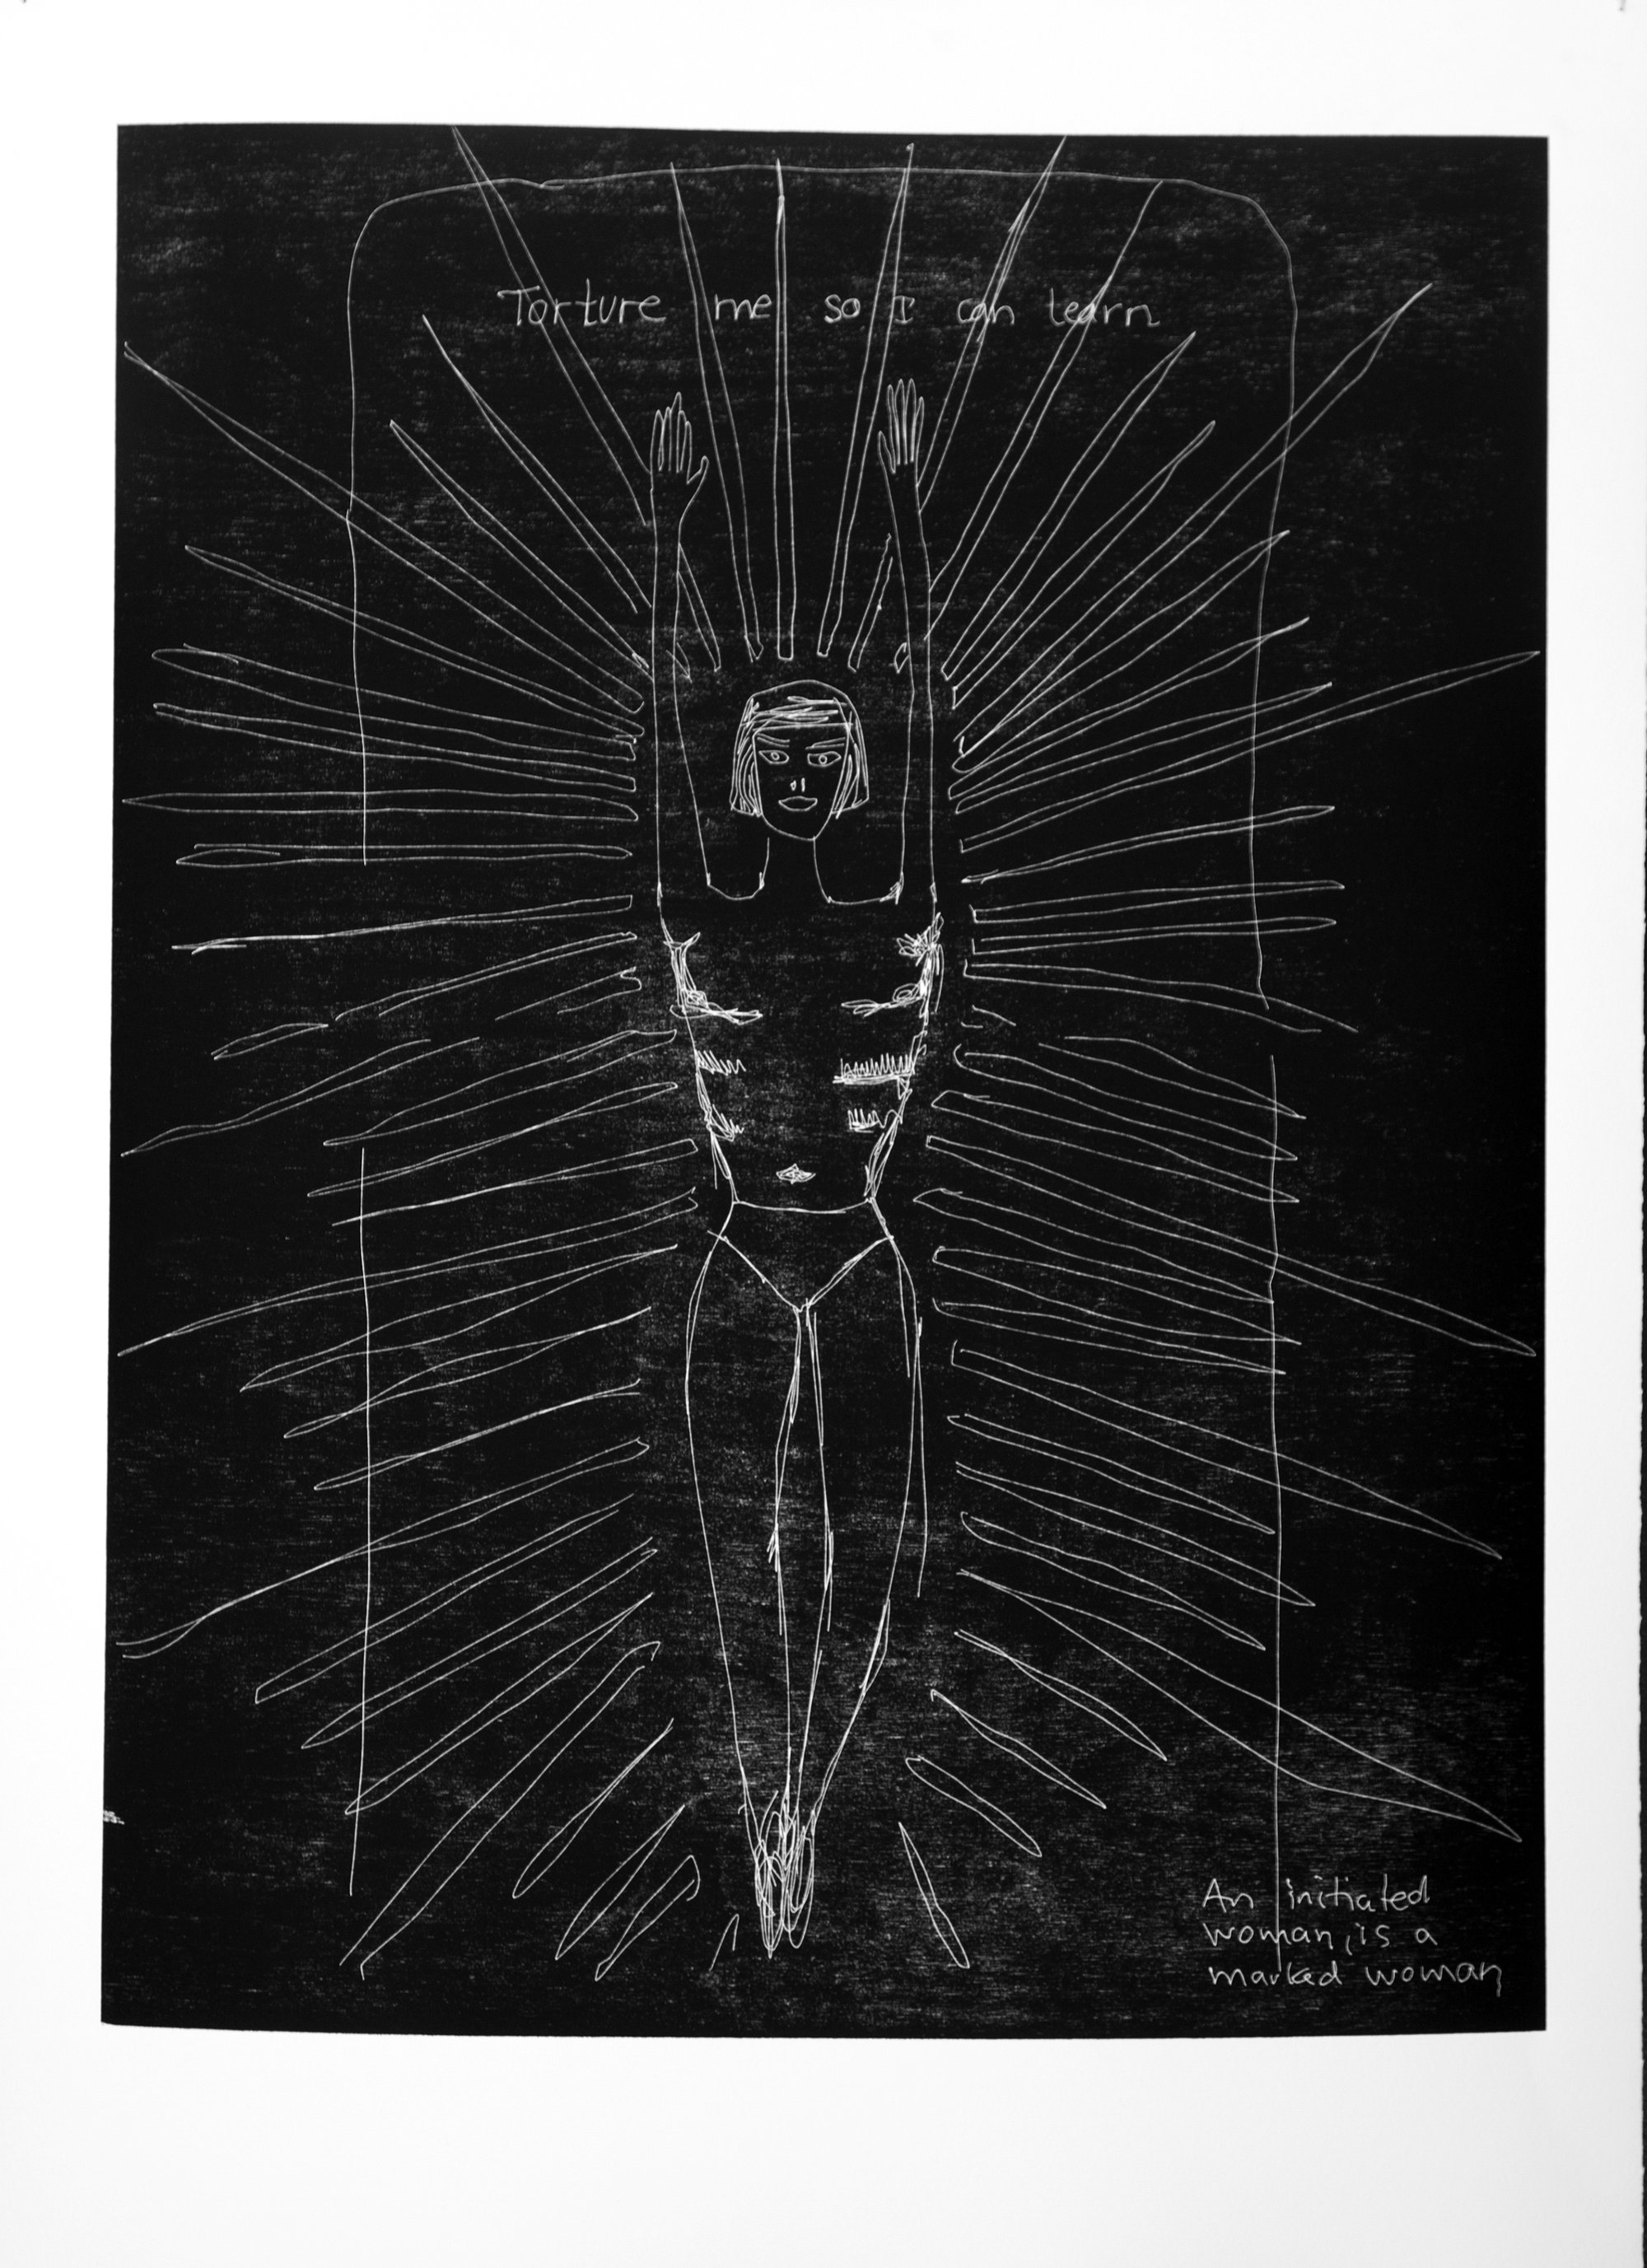 Sidsel Meineche Hansen, Torture me so I can learn miss Ovartaci, laser woodcut on paper, mounted on aluminium under museum glass, 62.8 x 47.9 cm, 2013